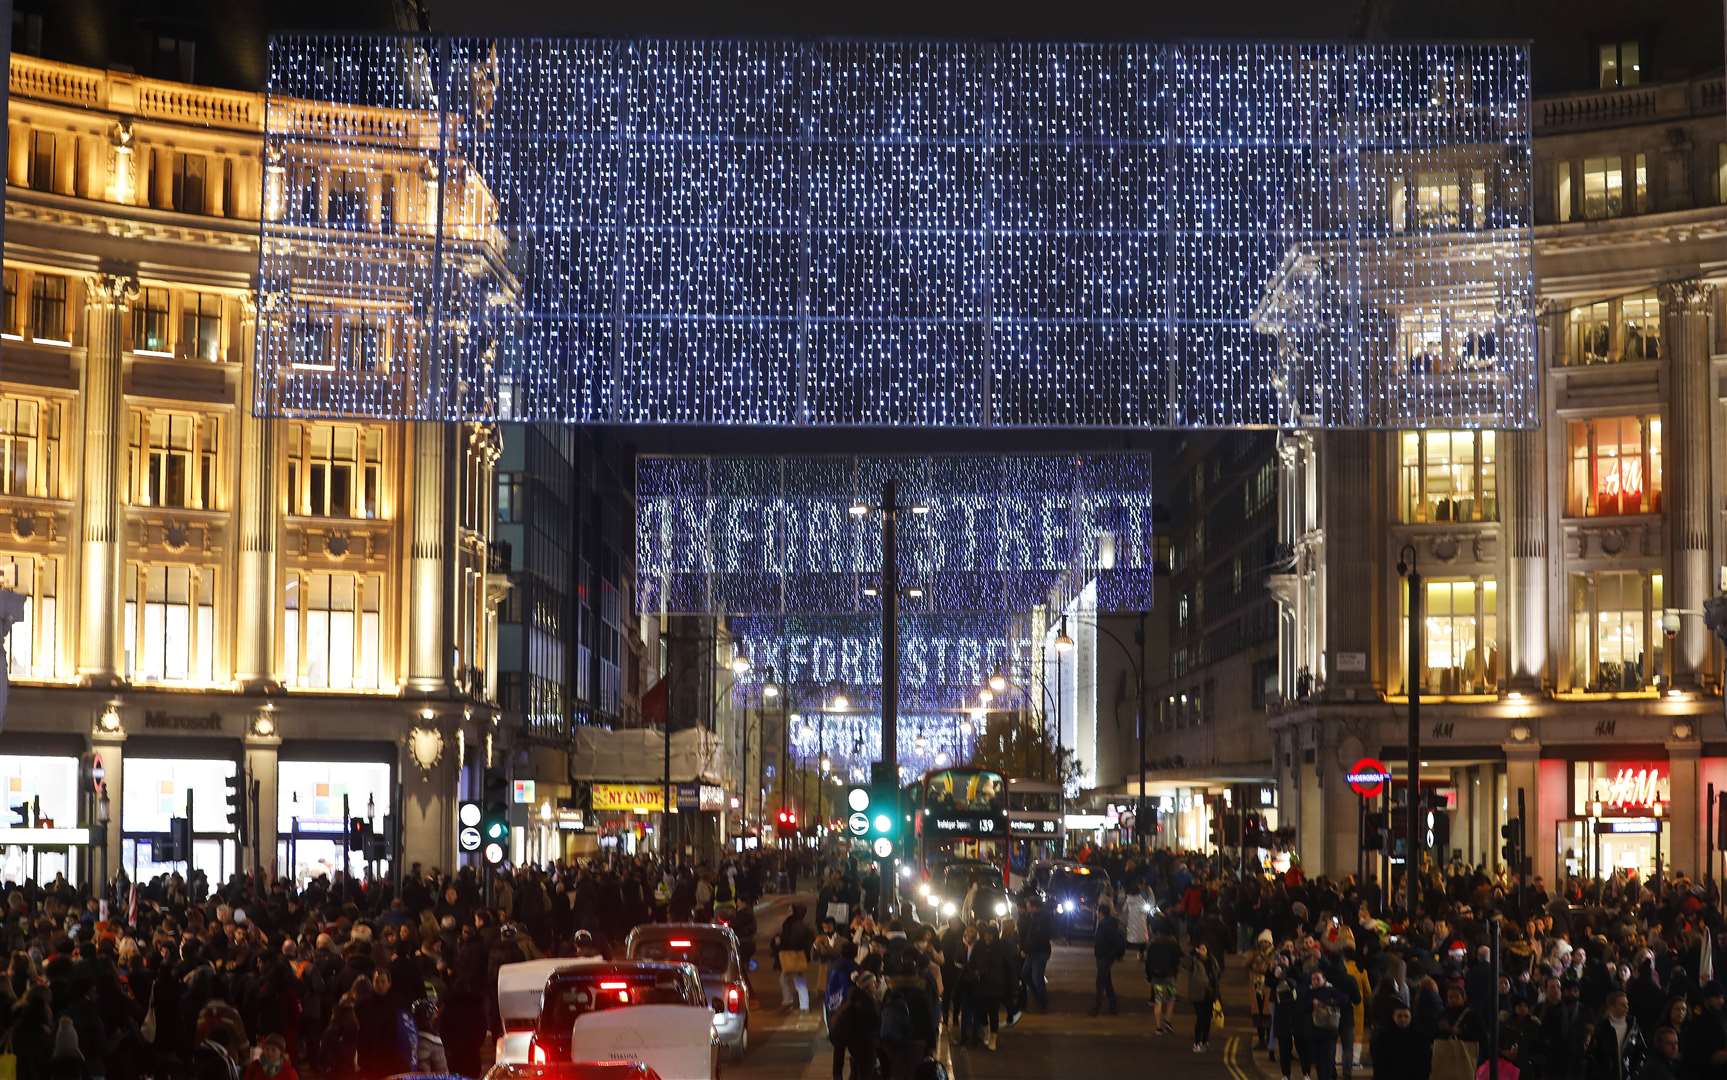 Oxford Street Christmas lights start campaign plus other London lights